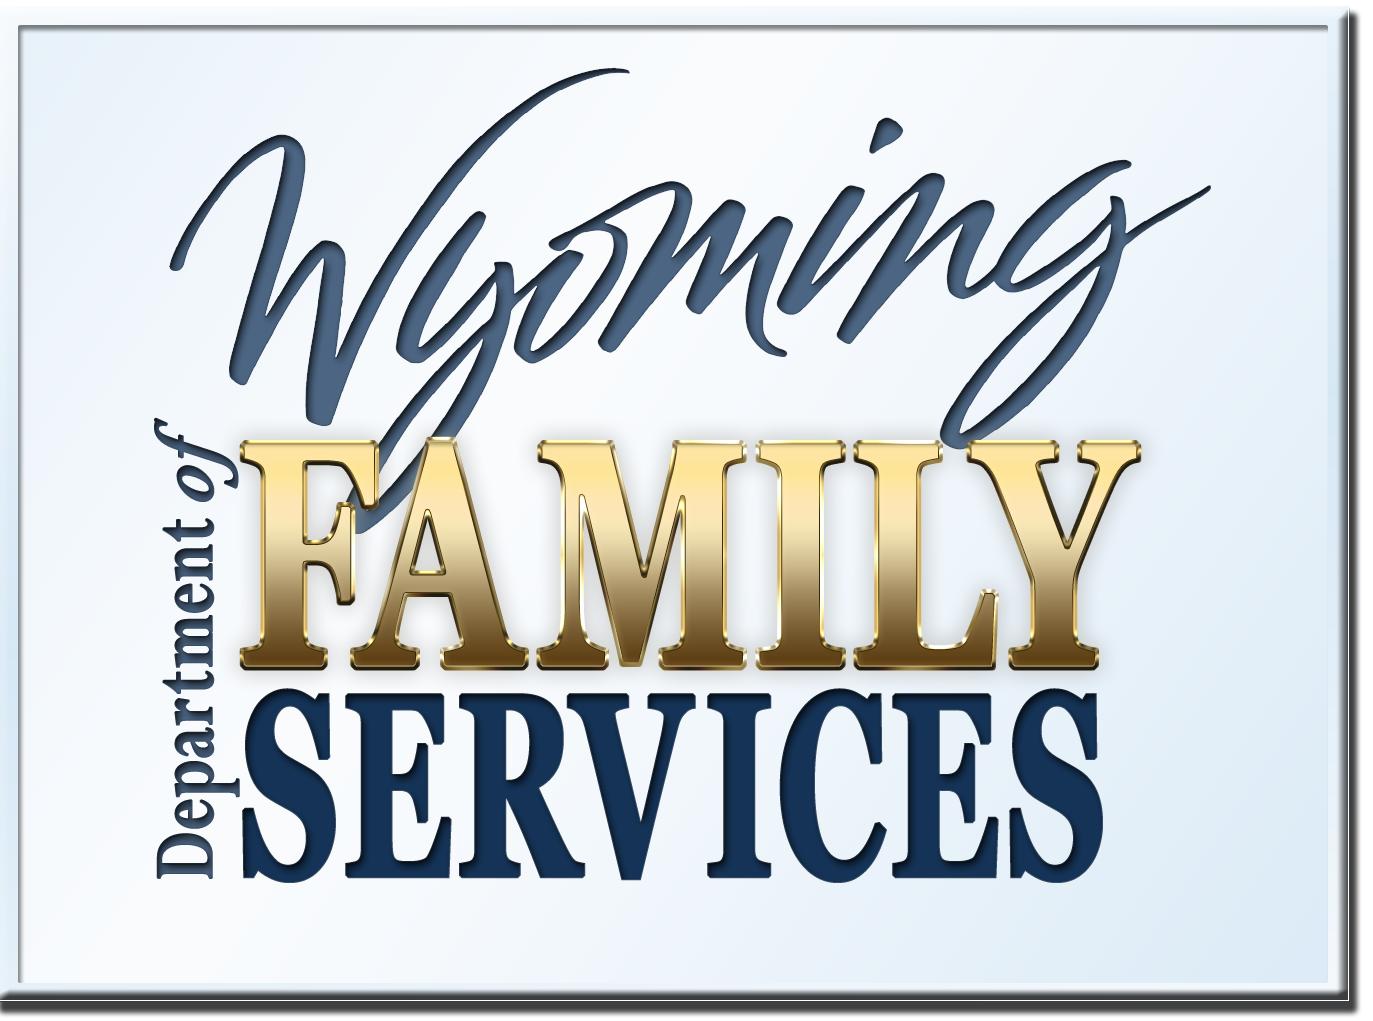 Wyoming Dept. of Family Services851 Werner Ct #200 Casper, WY 82601 307-473-3900http://dfsweb.wyo.gov/